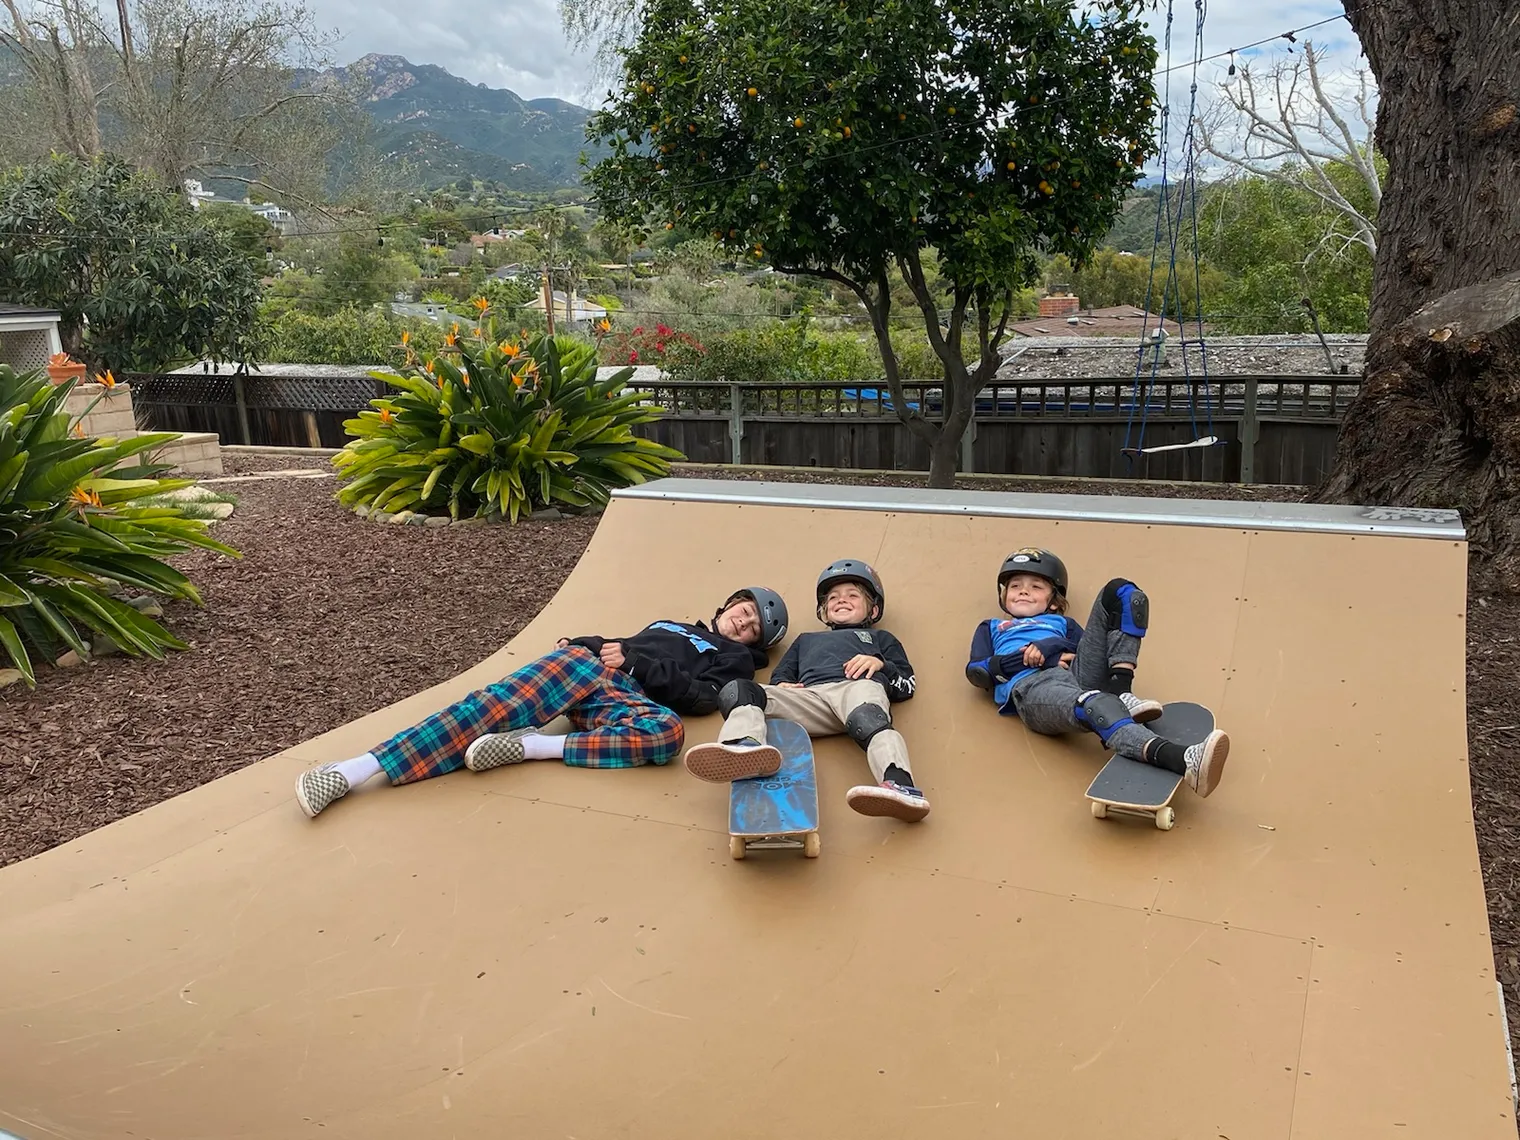 3 smiling Children in pads and helmets with skateboards laying on flat bottom of 2x4 built miniramp